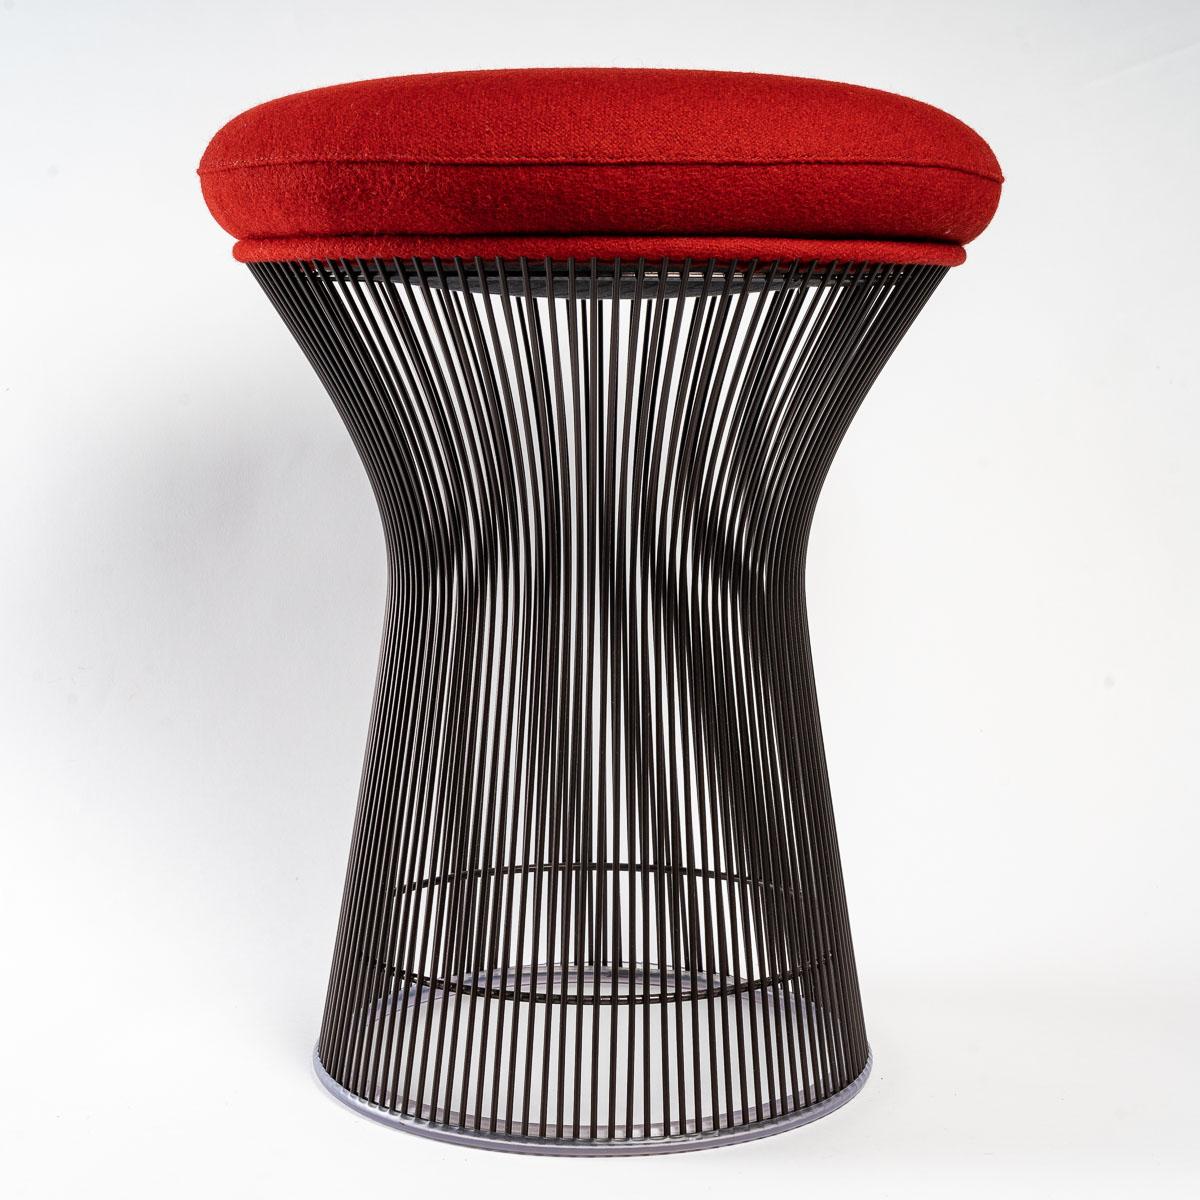 Authentic stool, designed by Warren Platner in 1966.
Recent Knoll edition in bordeaux burgondy Kvadrat Tonus fabrics and bronze metal structure.
Knoll ''K'' fabrics under the seat.

New condition.

H. 54.5cm x D. 44cm

Model still available